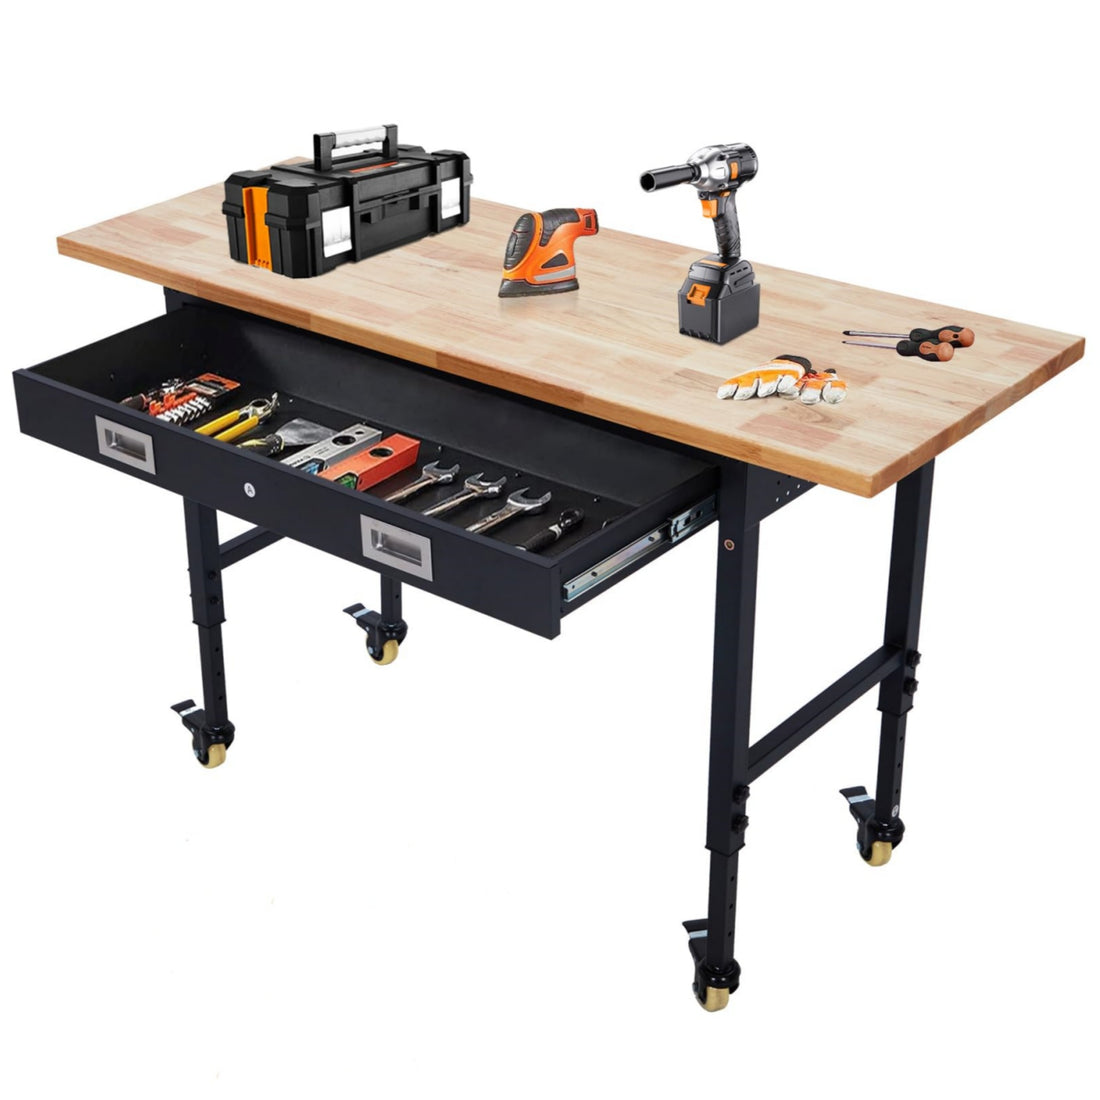 60 Inch Workbench with Drawer Storage, Adjustable Height Worktable for Garage, Rubber Wood Top Heavy Duty Workbench with Power Outlet & 4 Lockable Wheels, 2000lbs Load Capacity for Workshop Home